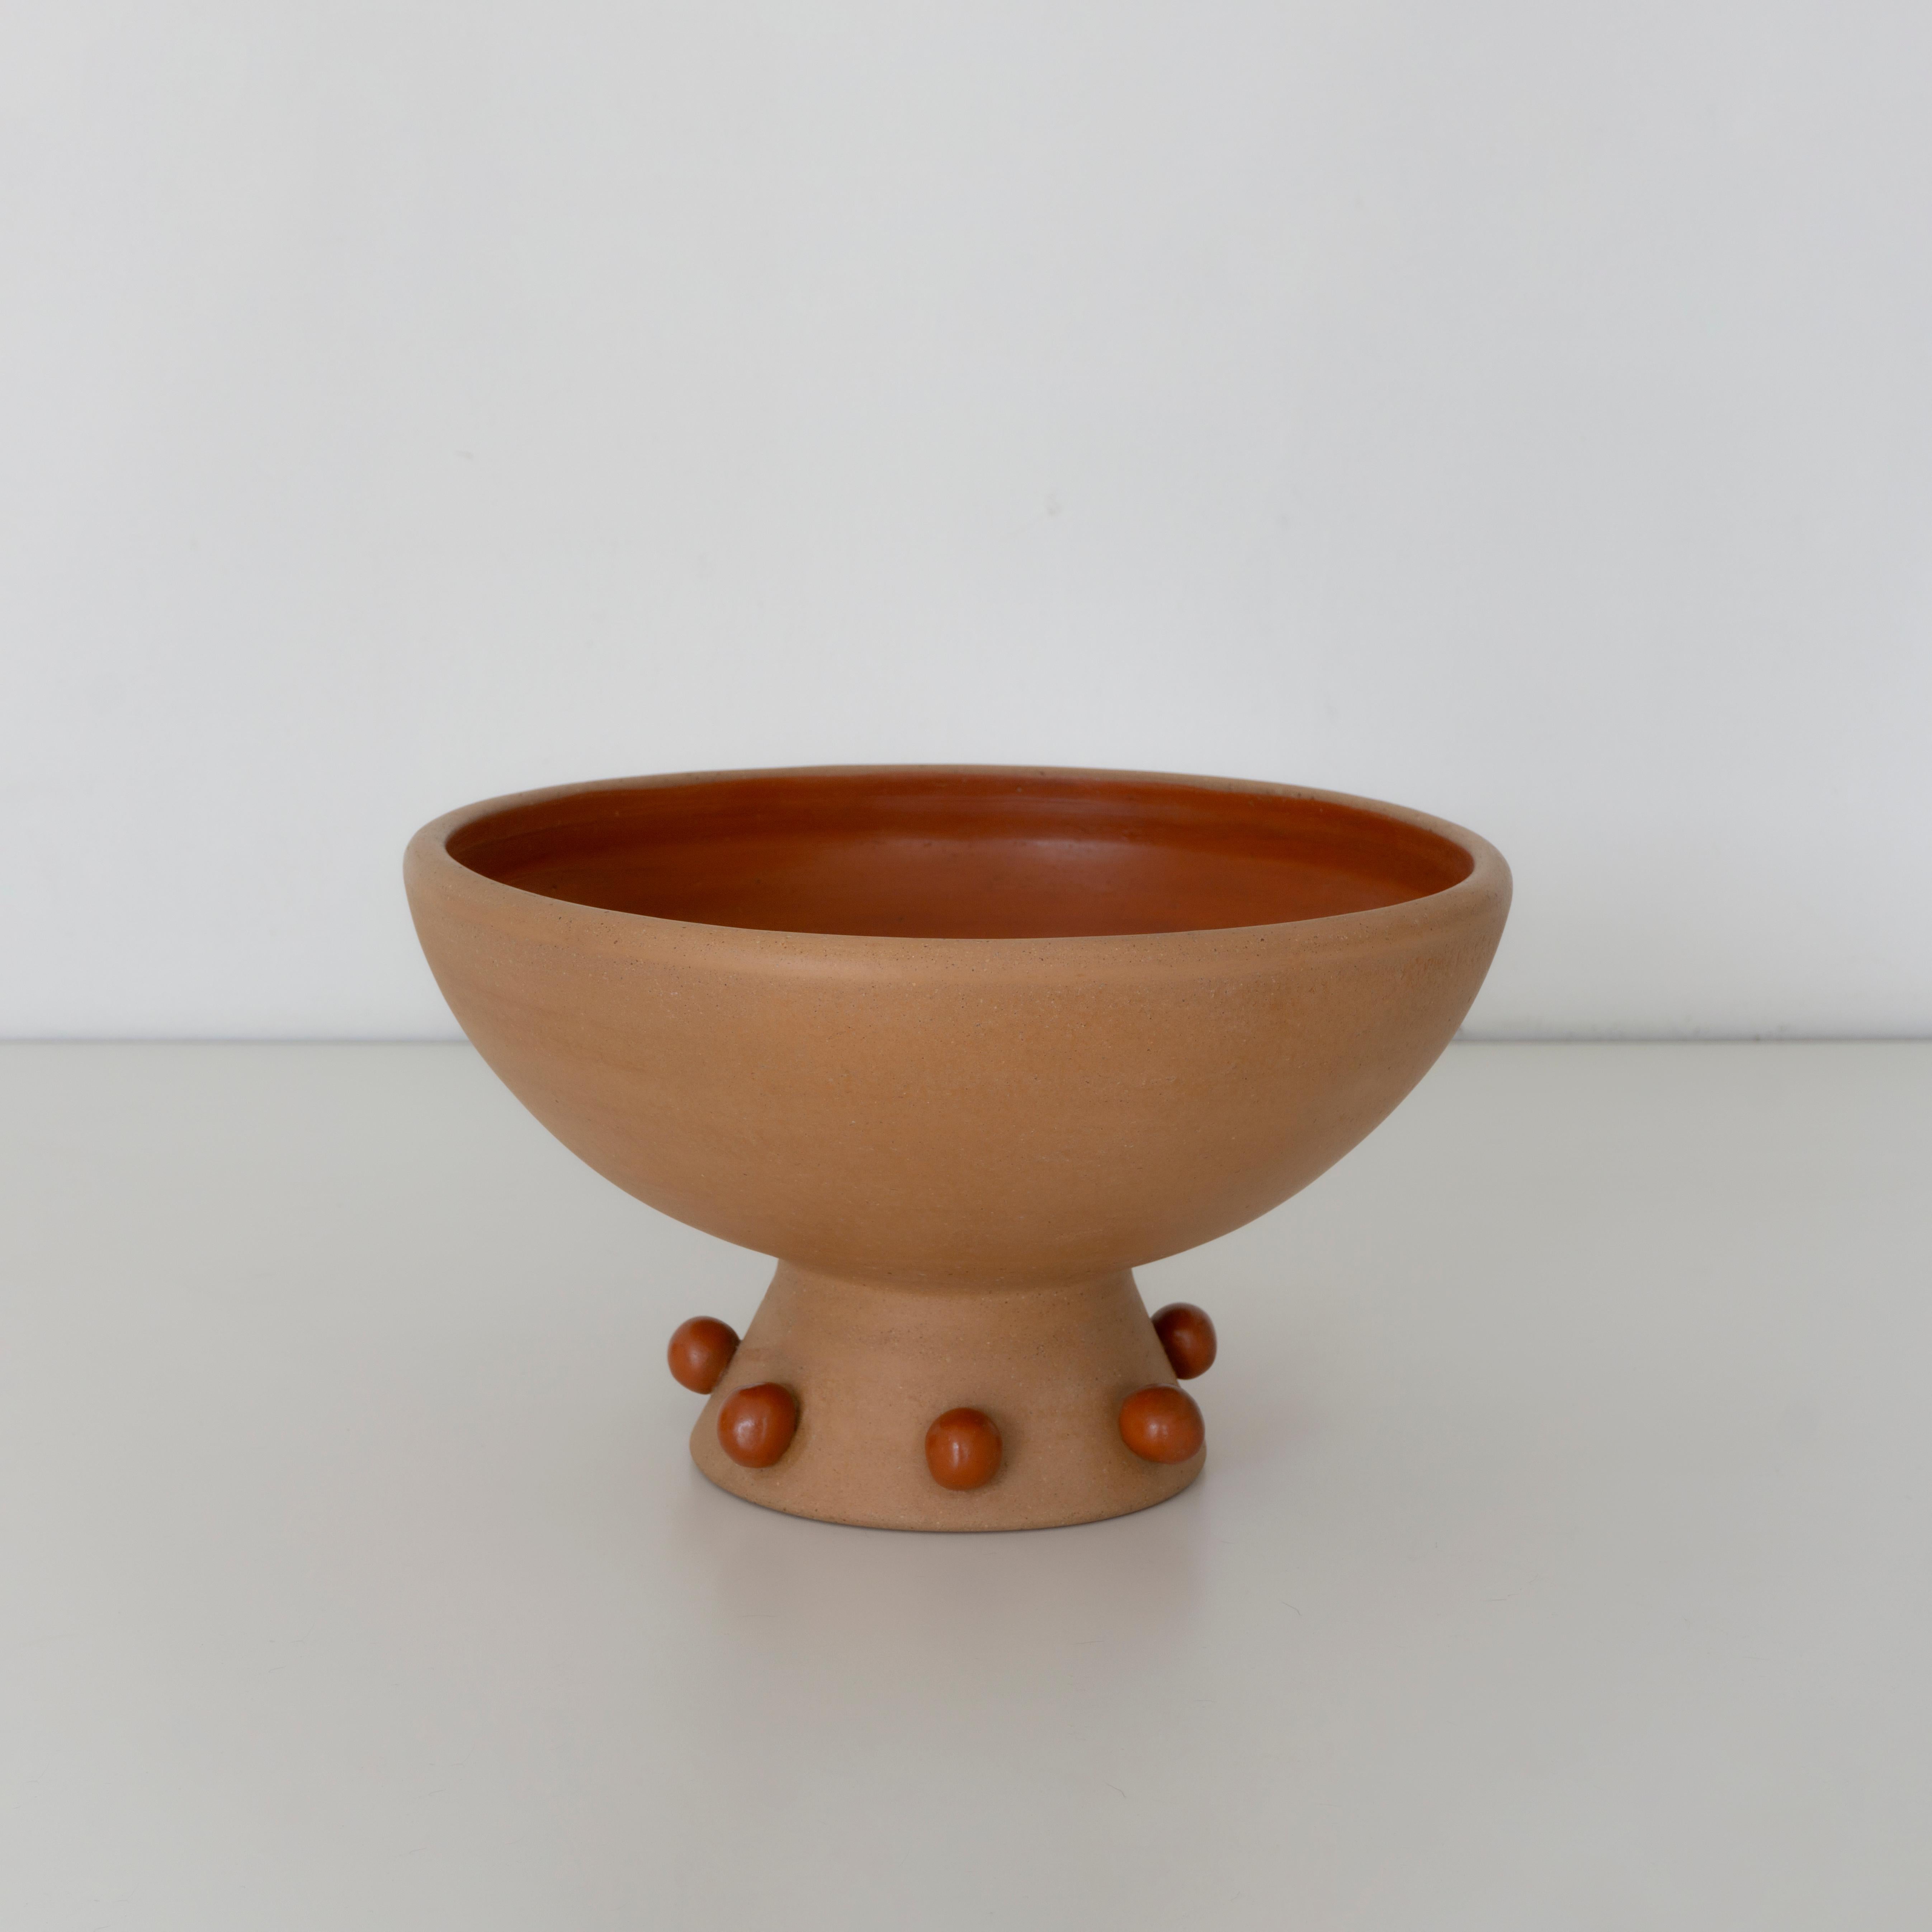 Other Decorative Clay Bowl/Vase Danzante 01. Smooth Soft Clay Finish. By Raíz Mx For Sale